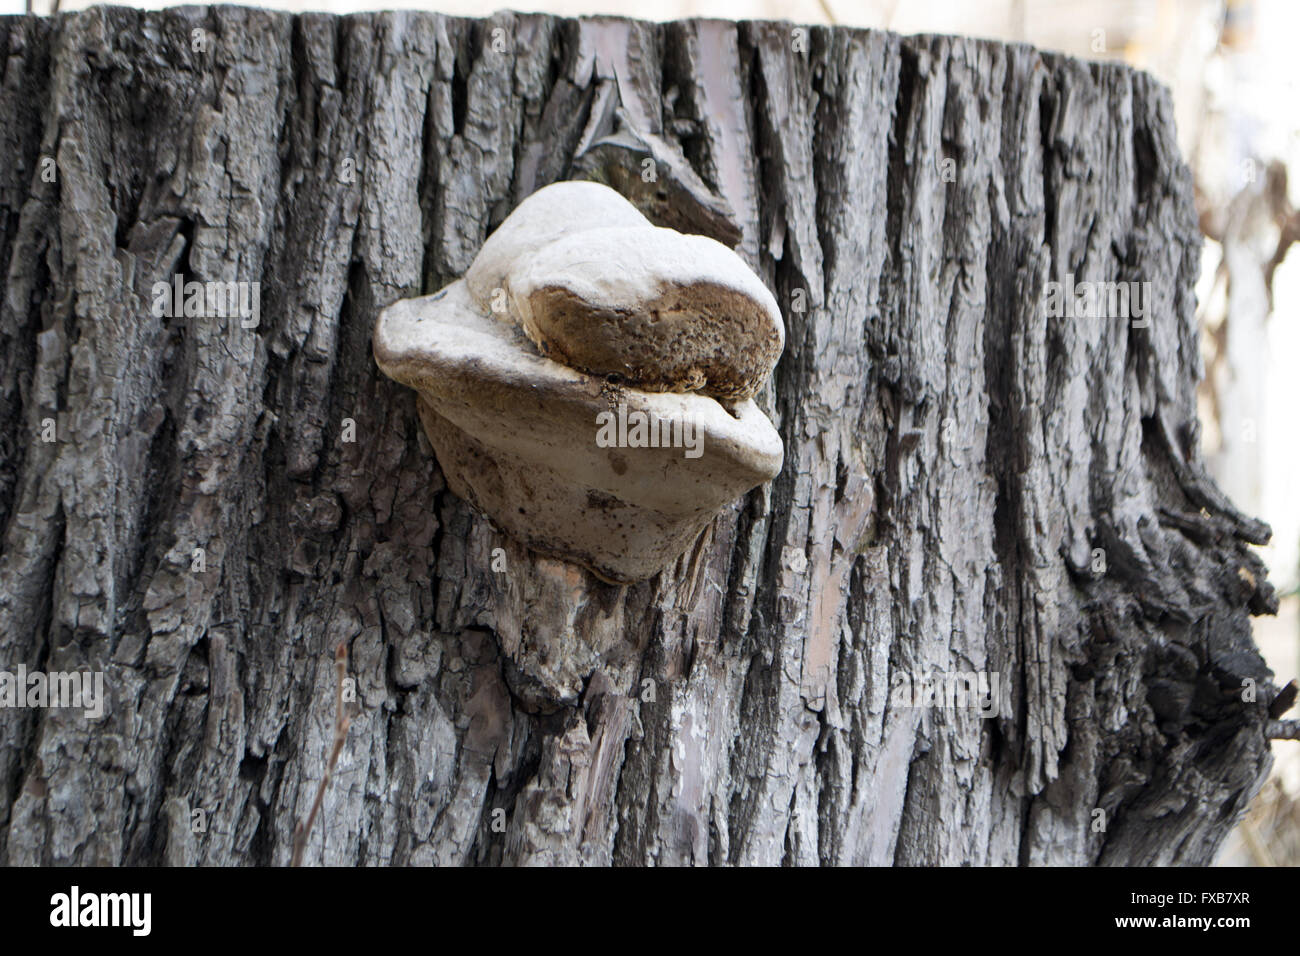 fungus parasite on the tree. Spring in the forest Stock Photo